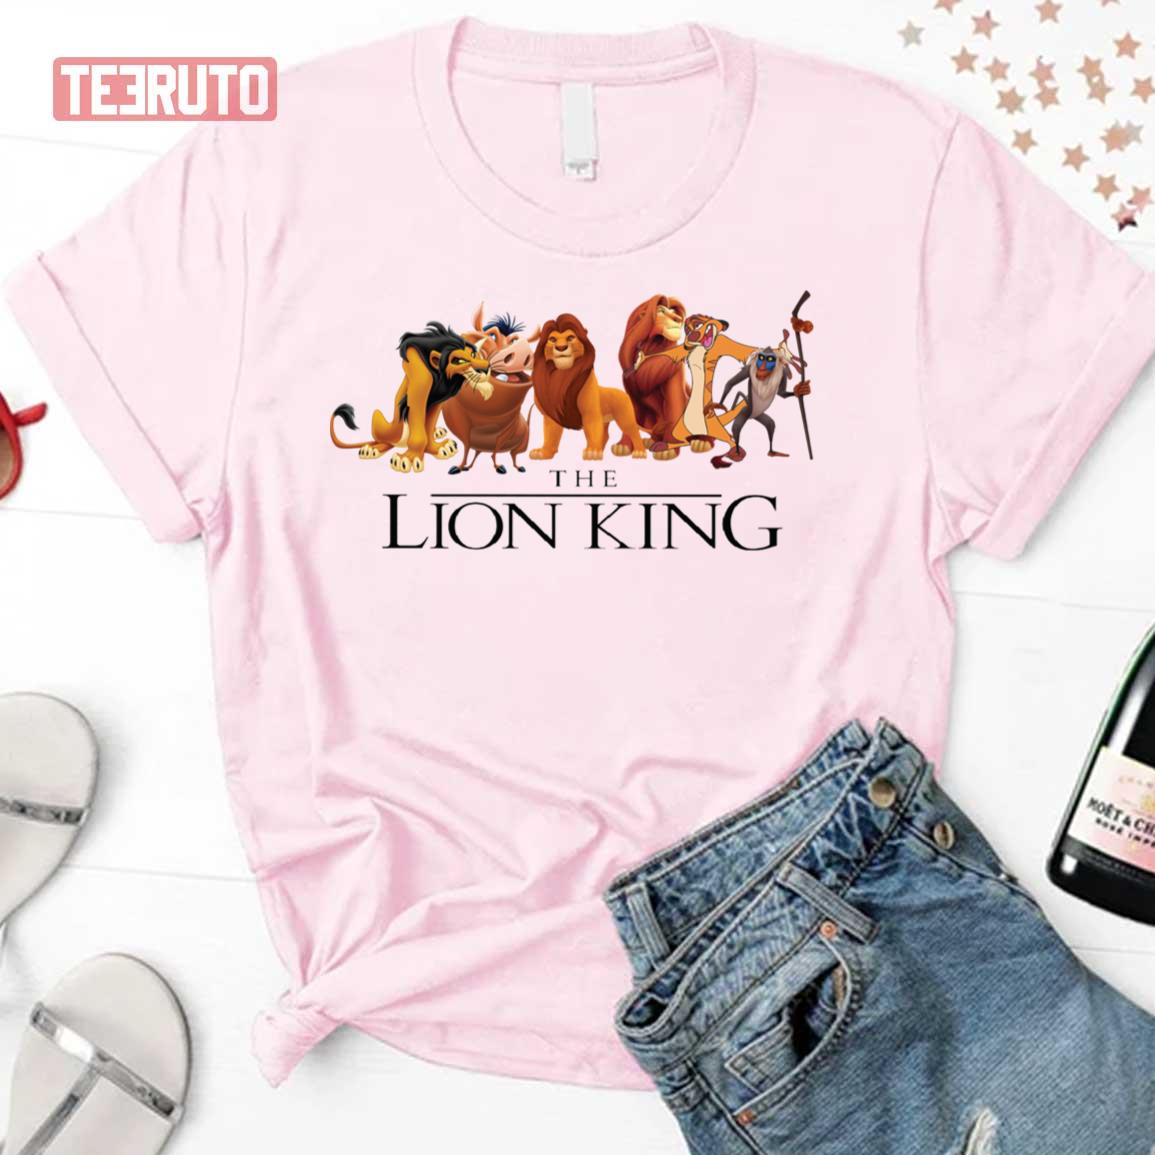 The Lion King Characters Family Stick Together Unisex T-Shirt - Teeruto